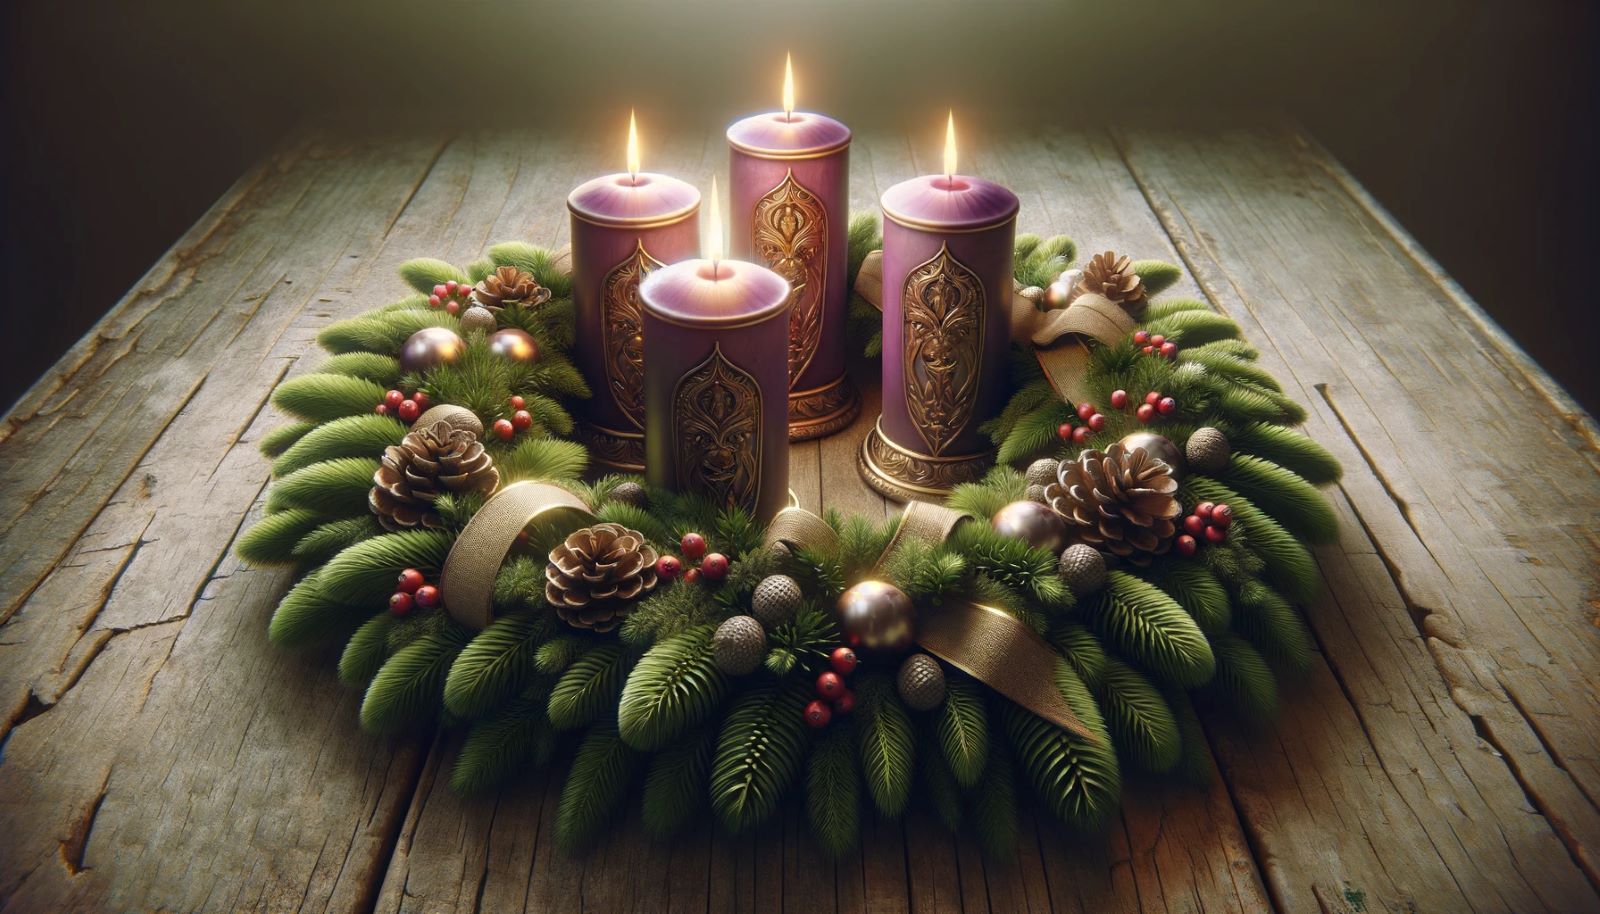 What Do The Purple Candles Mean In Advent